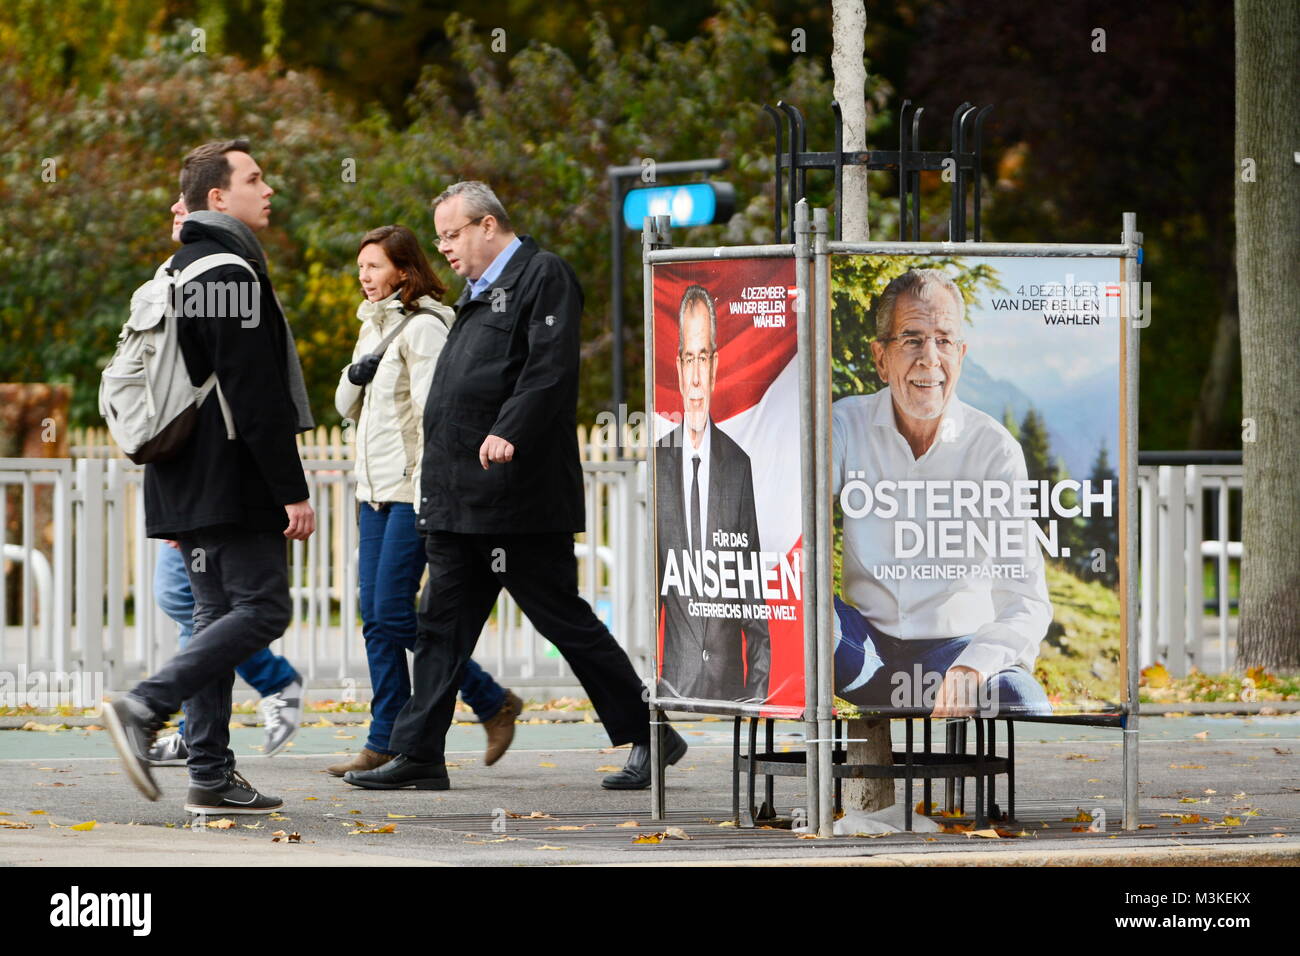 Vienna, Austria. 29.Oct.2016. New poster campaign by the independent candidate Alexander van der Bellen for the federal presidential election on 4 December in Austria. © Franz Perc/Alamy Live News Stock Photo